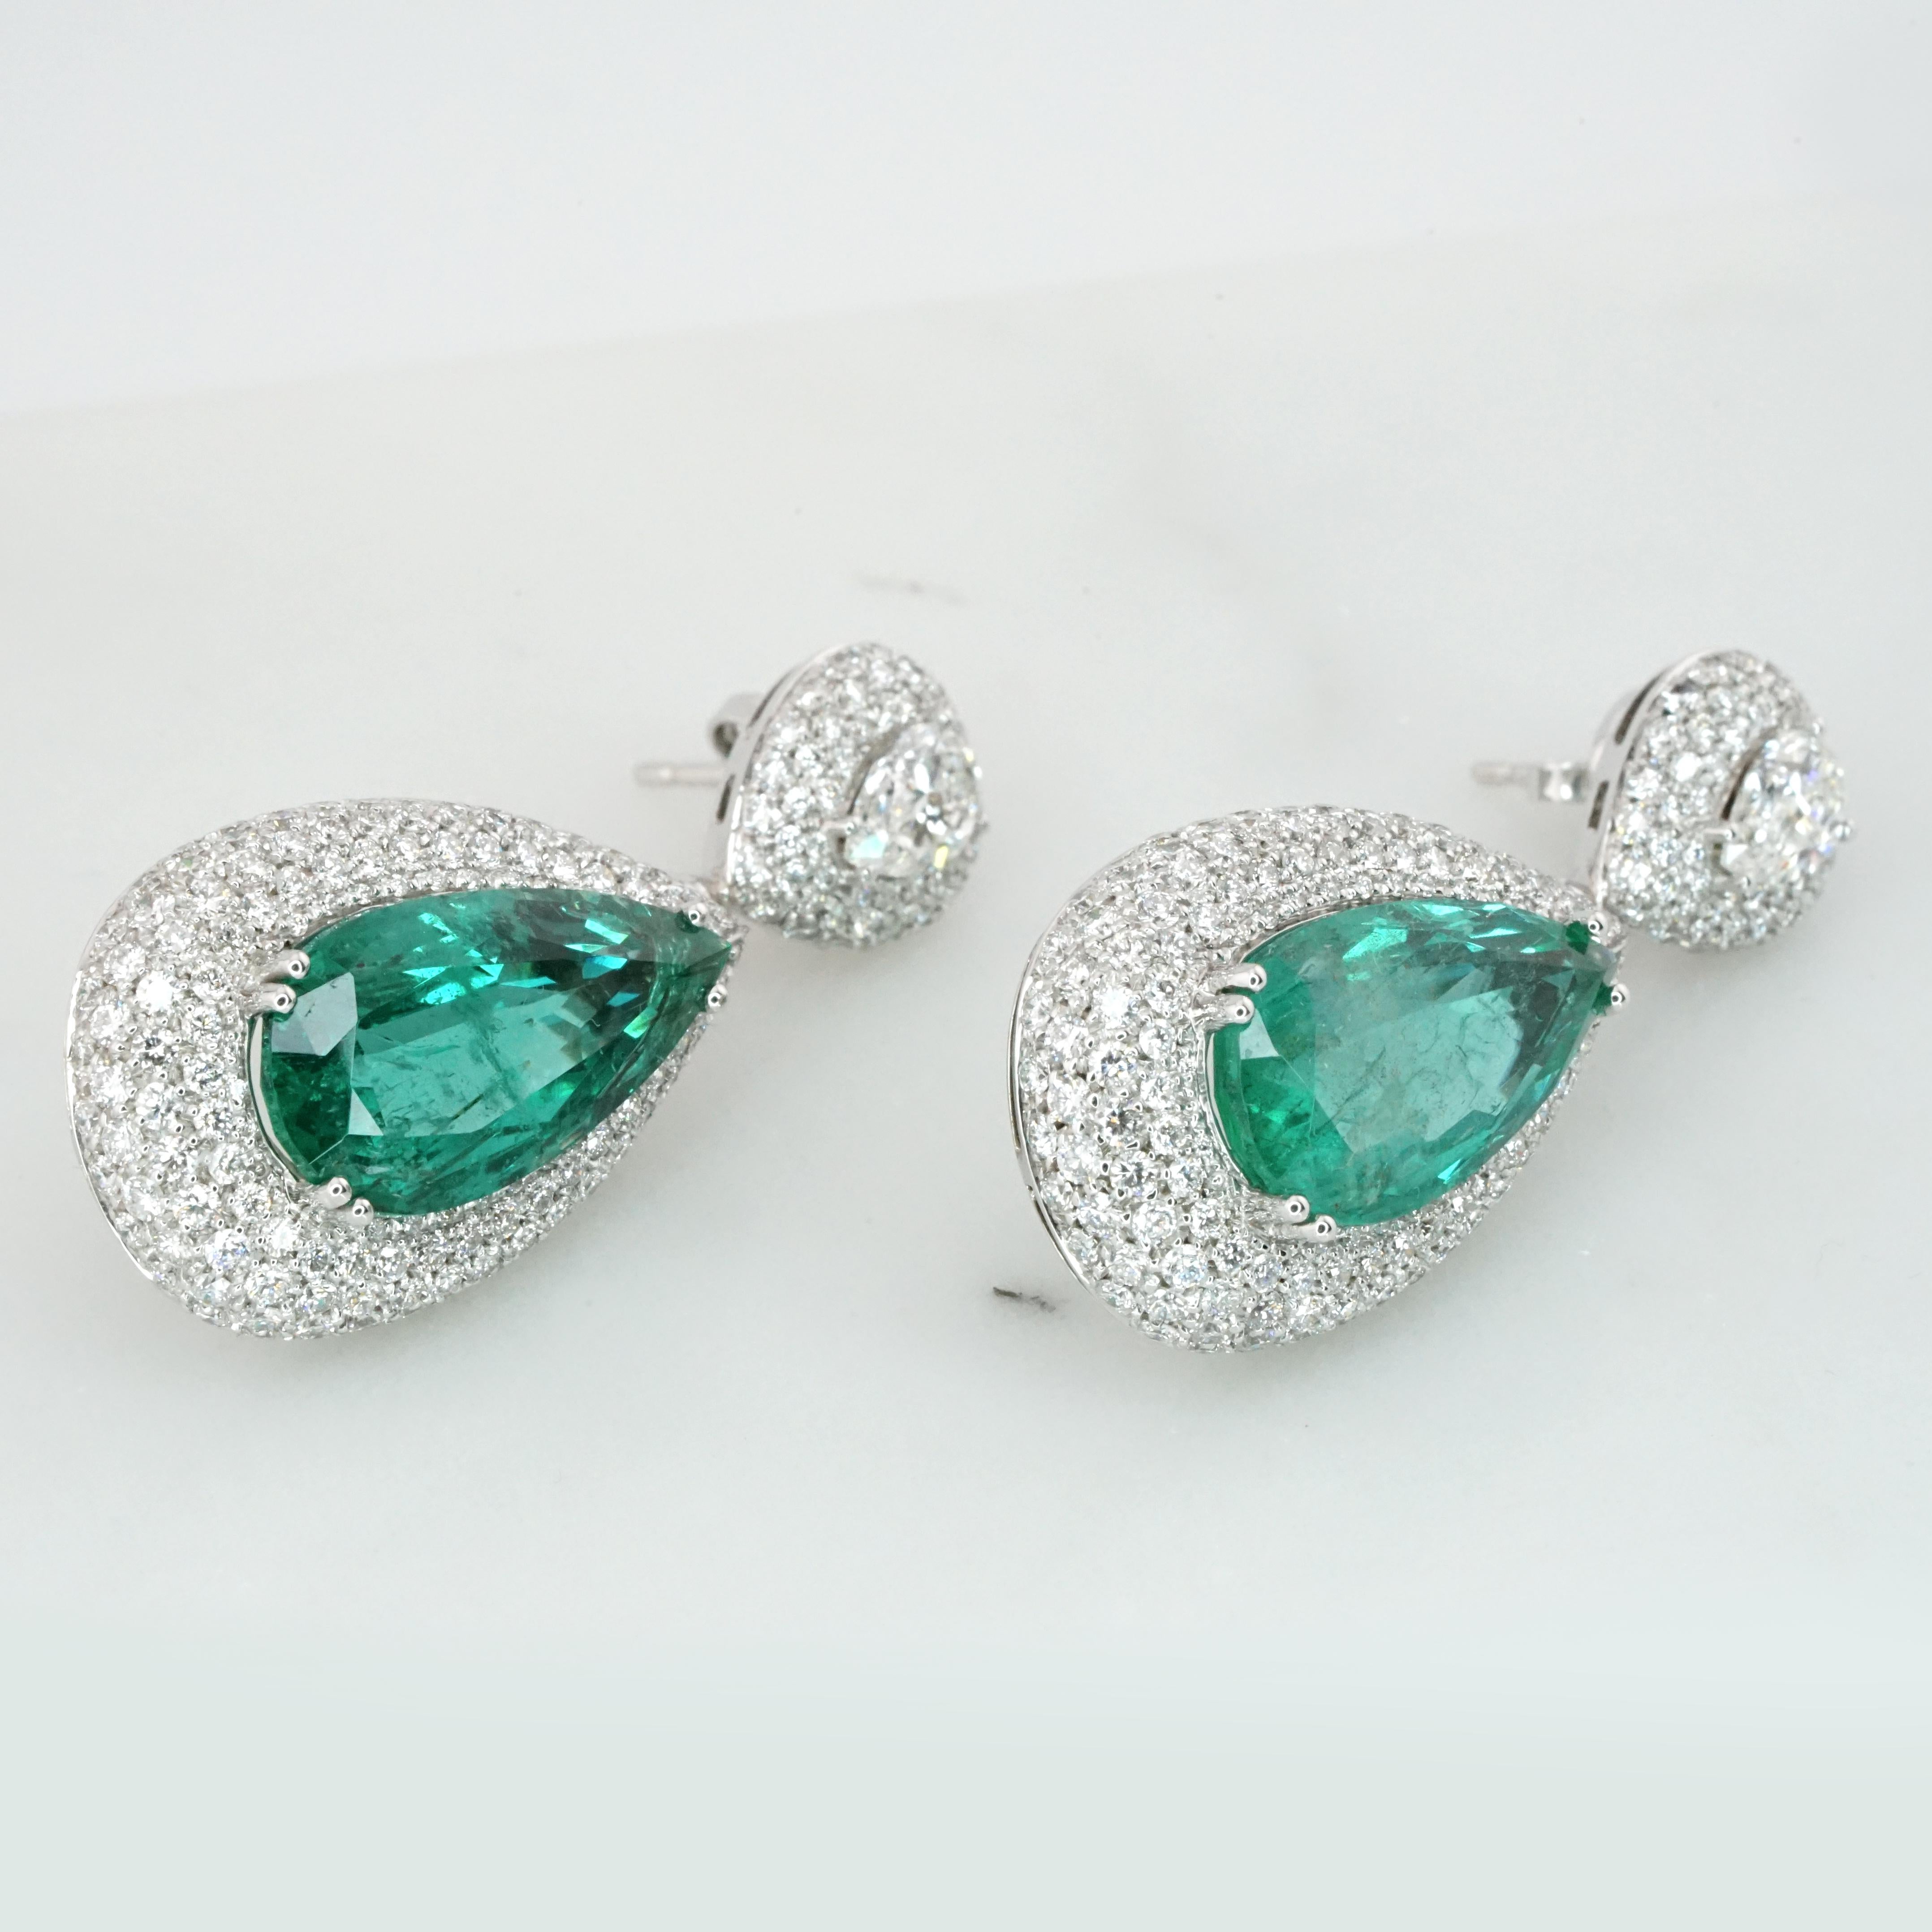 Exuding elegance and timeless sophistication, these earrings feature a stunning pair of IGI certified pear cut green emeralds, weighing approximately 13 carats in total. These exquisite emeralds are the centerpiece of the design, displaying a vivid